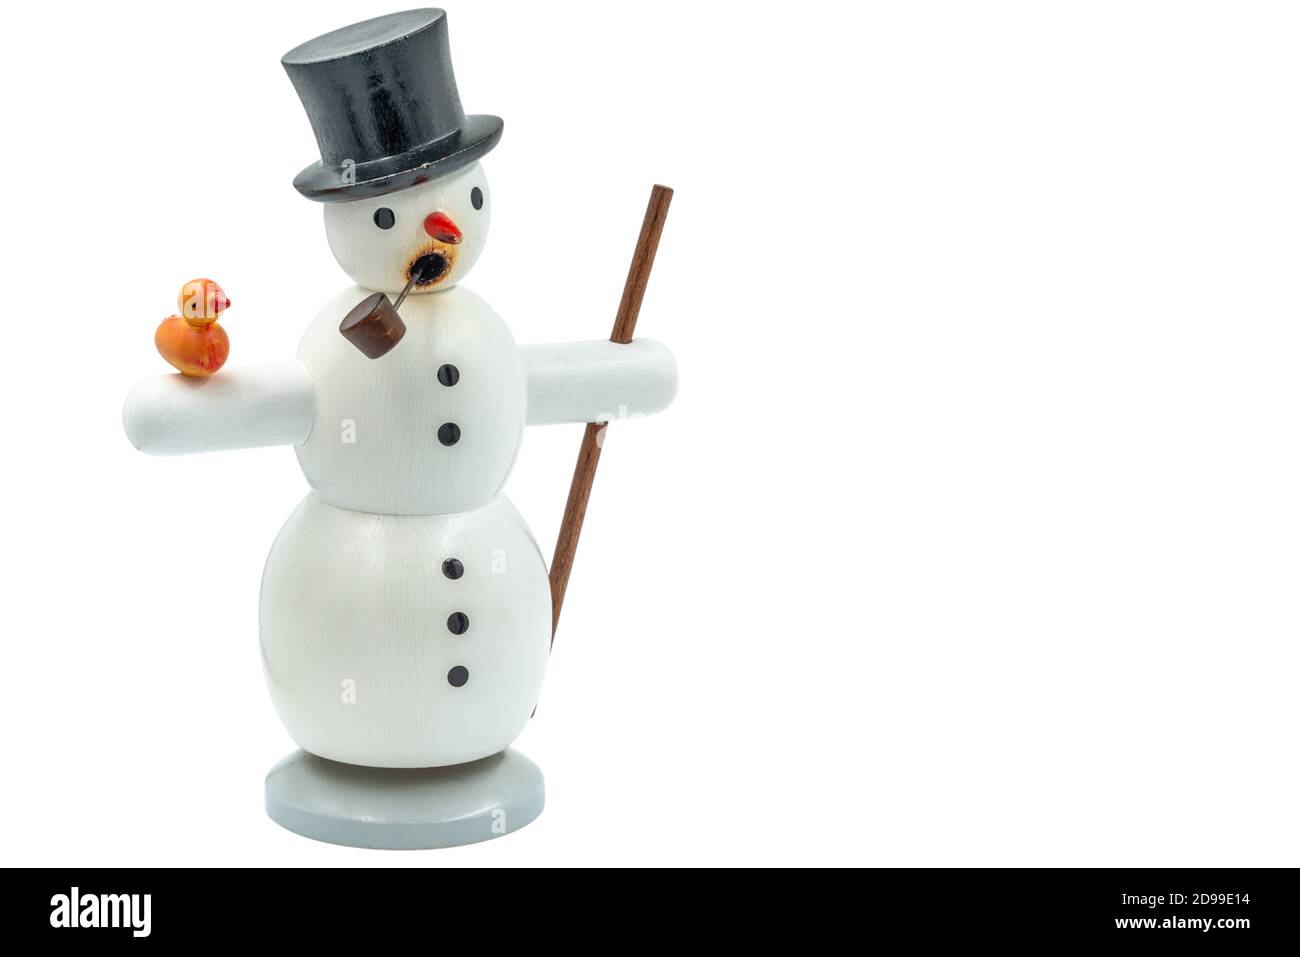 Original carved wooden Snow man Christmas Smoking man figurine cut out on a white background Stock Photo